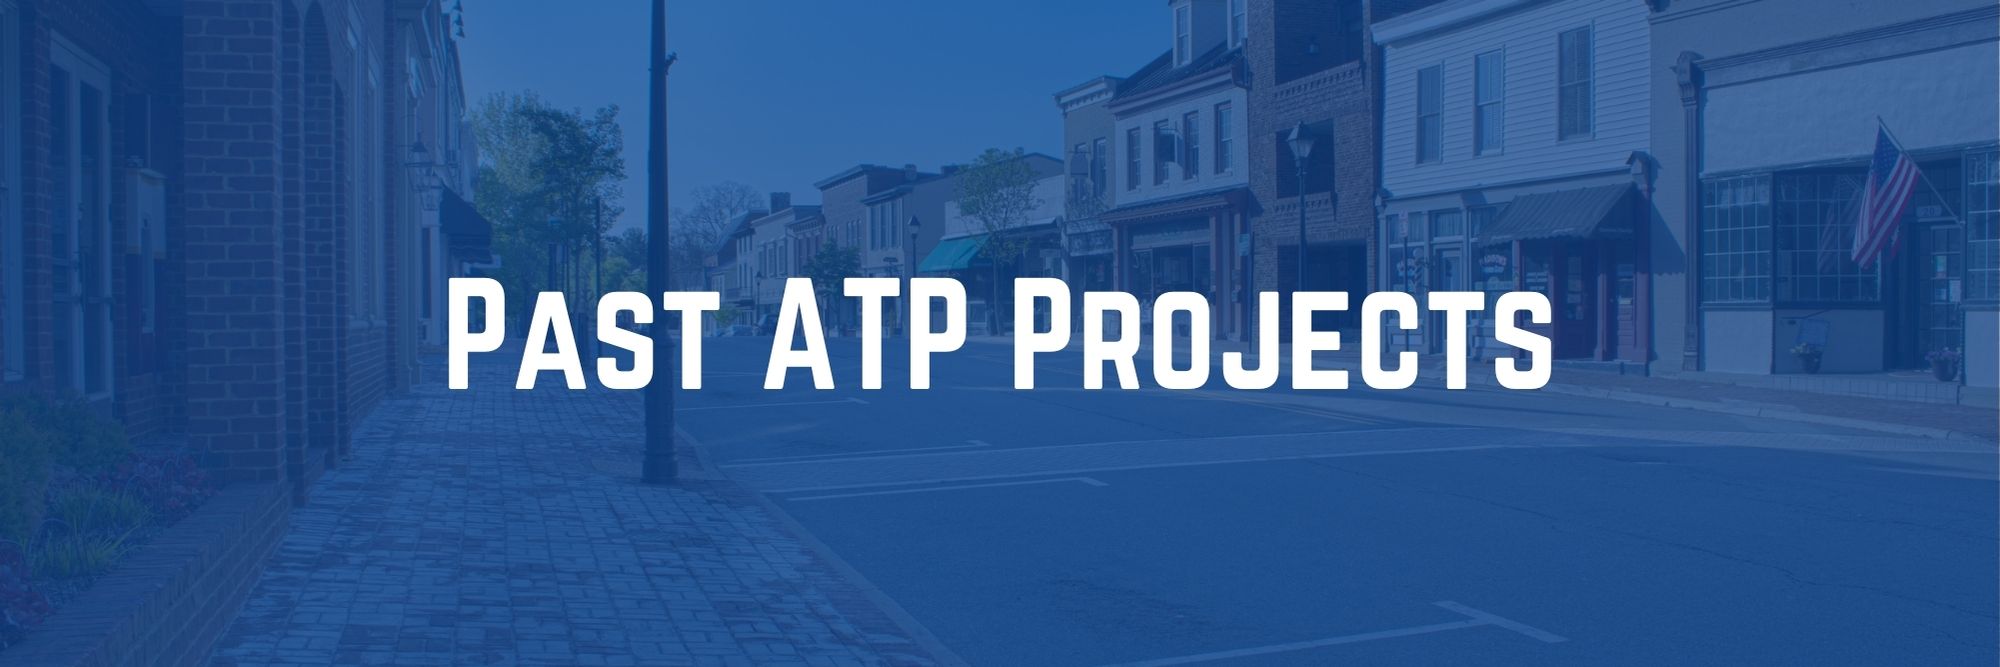 Past ATP Projects